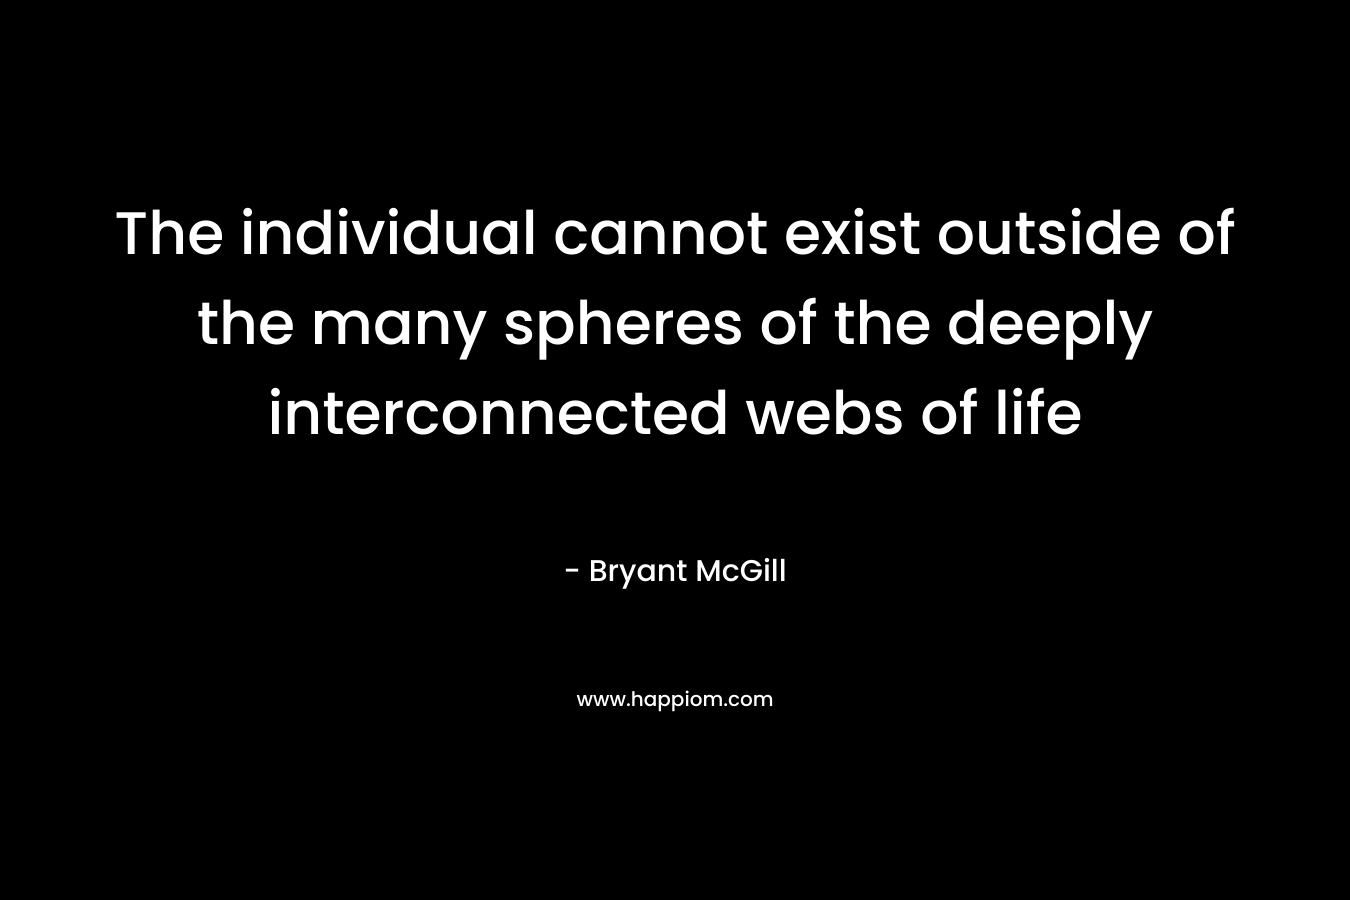 The individual cannot exist outside of the many spheres of the deeply interconnected webs of life